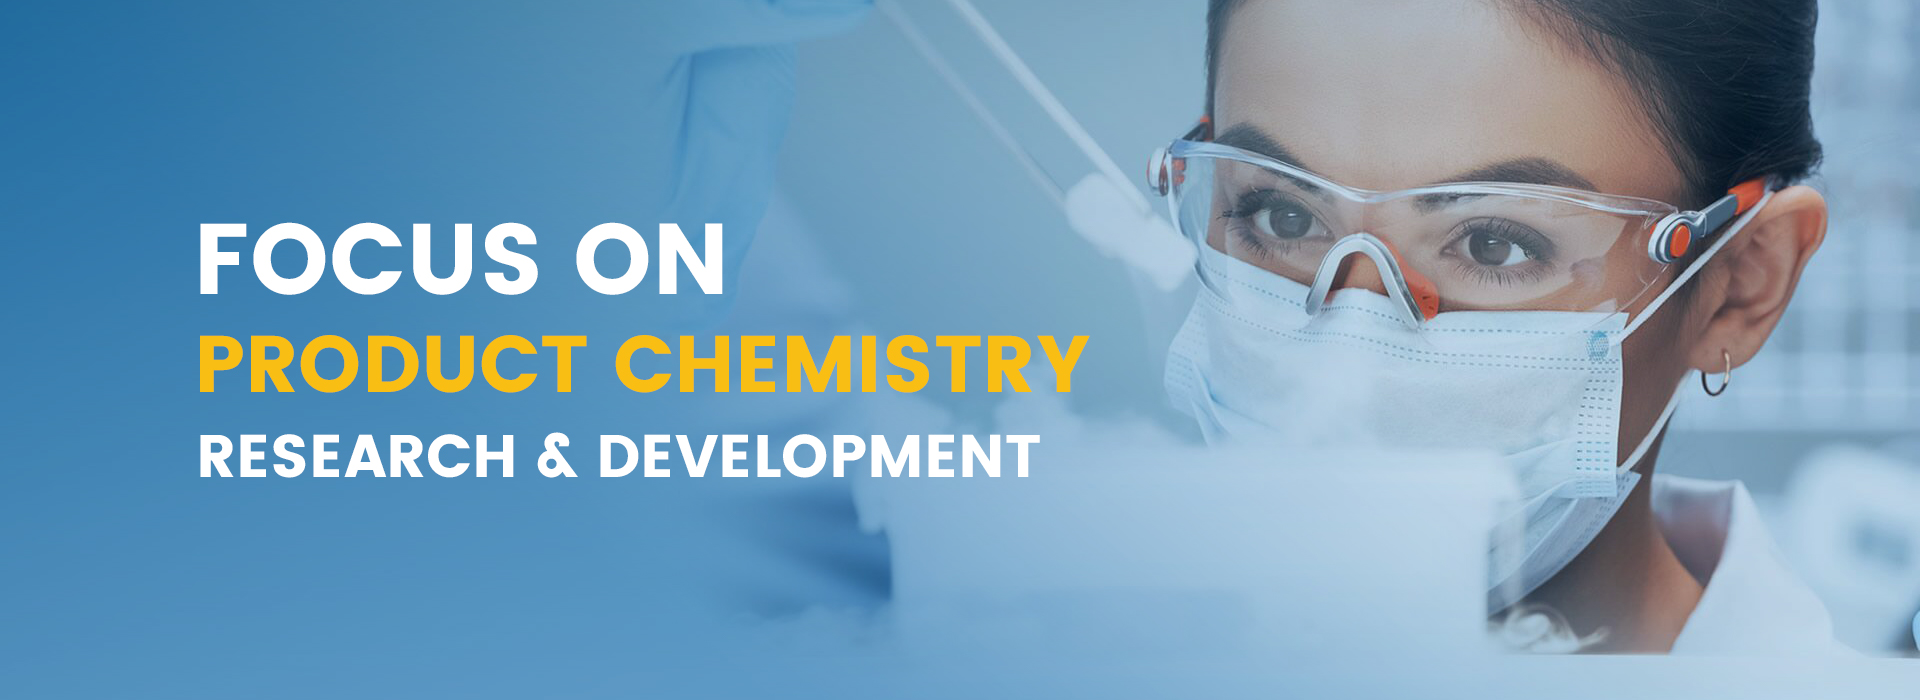 Product Chemistry Research & Development.